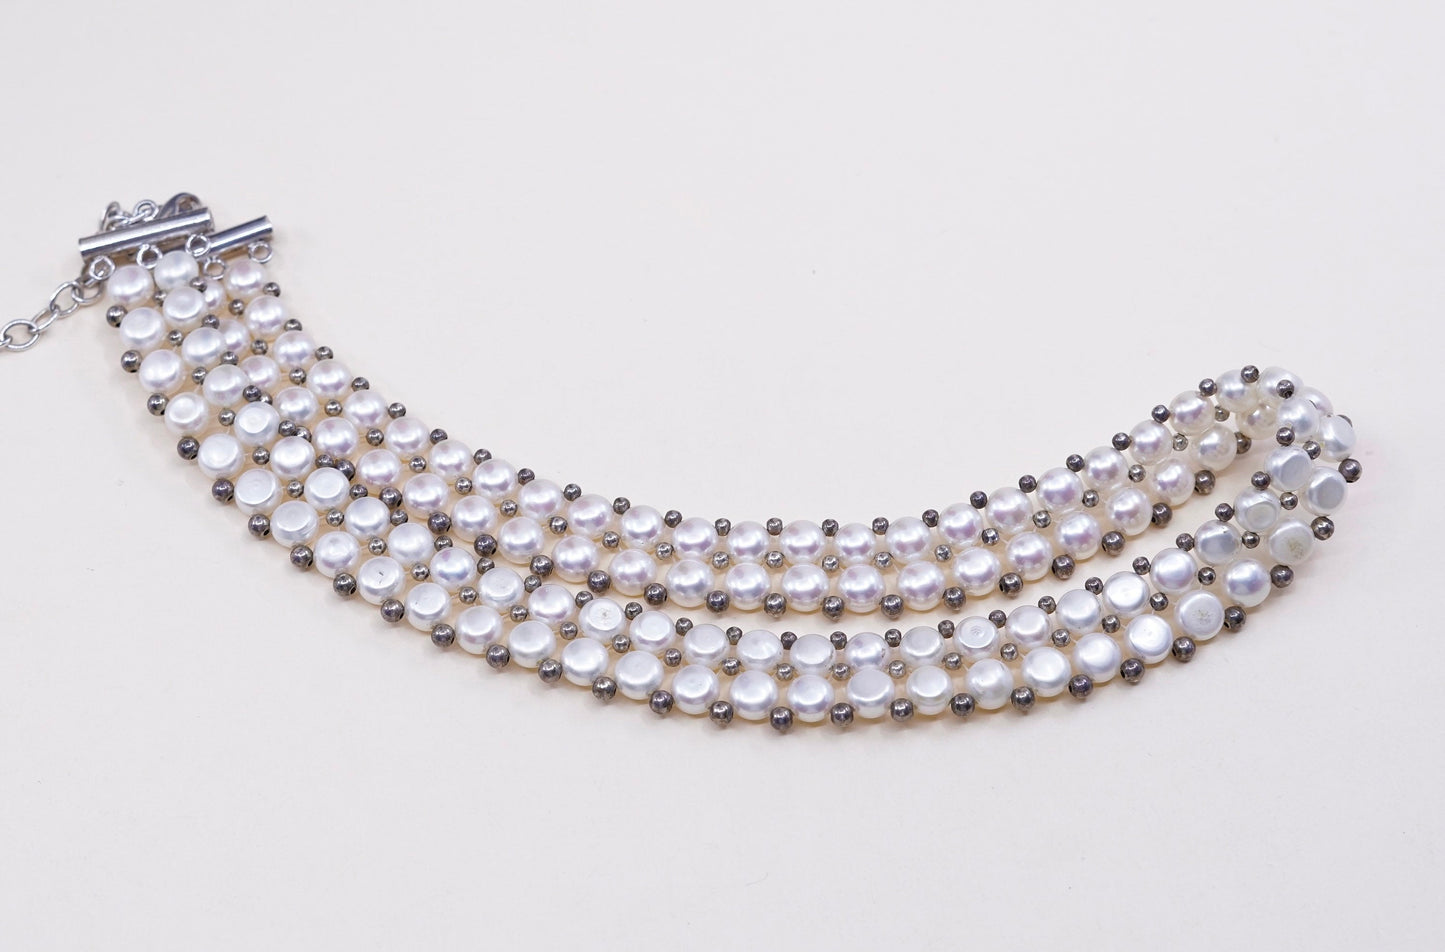 14+4” Vintage sterling 925 silver white freshwater pearl beads necklace chain